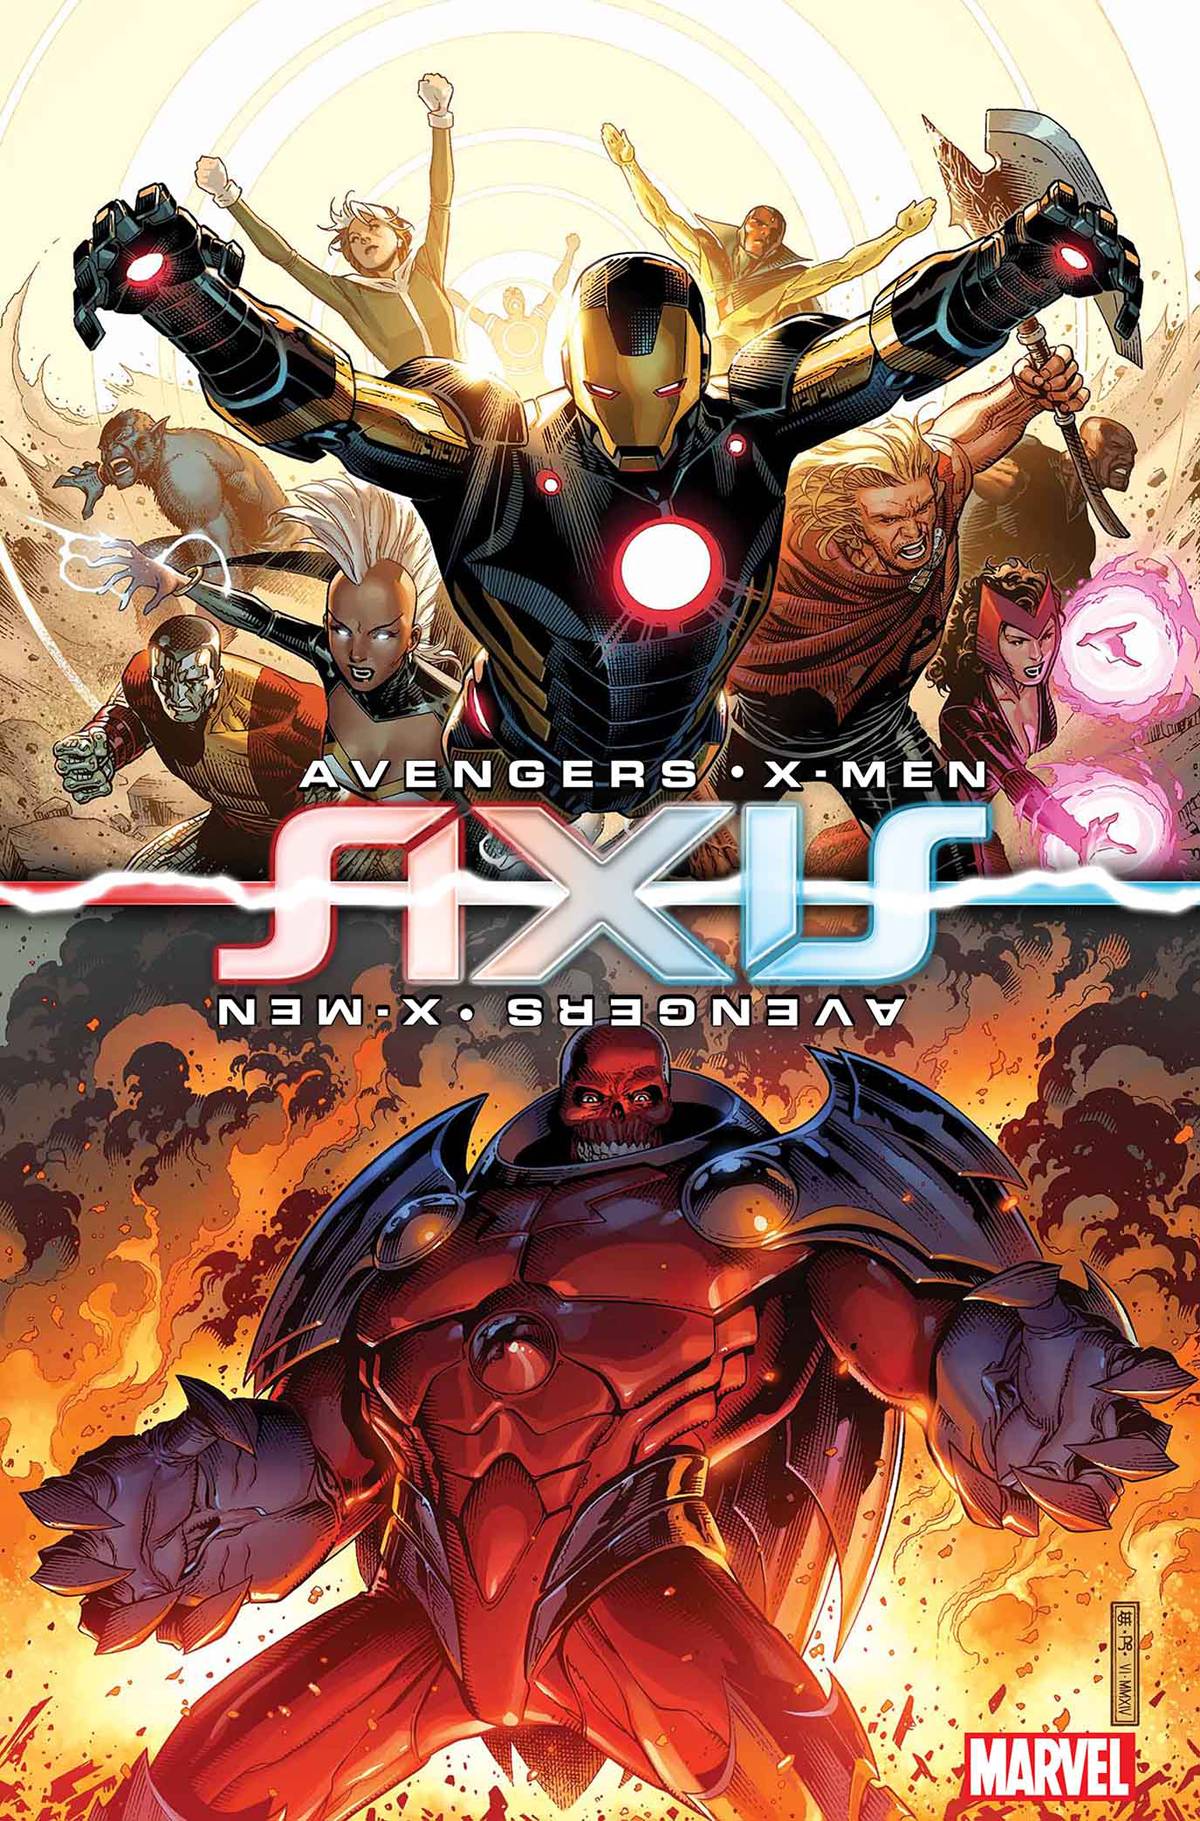 AVENGERS AND X-MEN AXIS #1